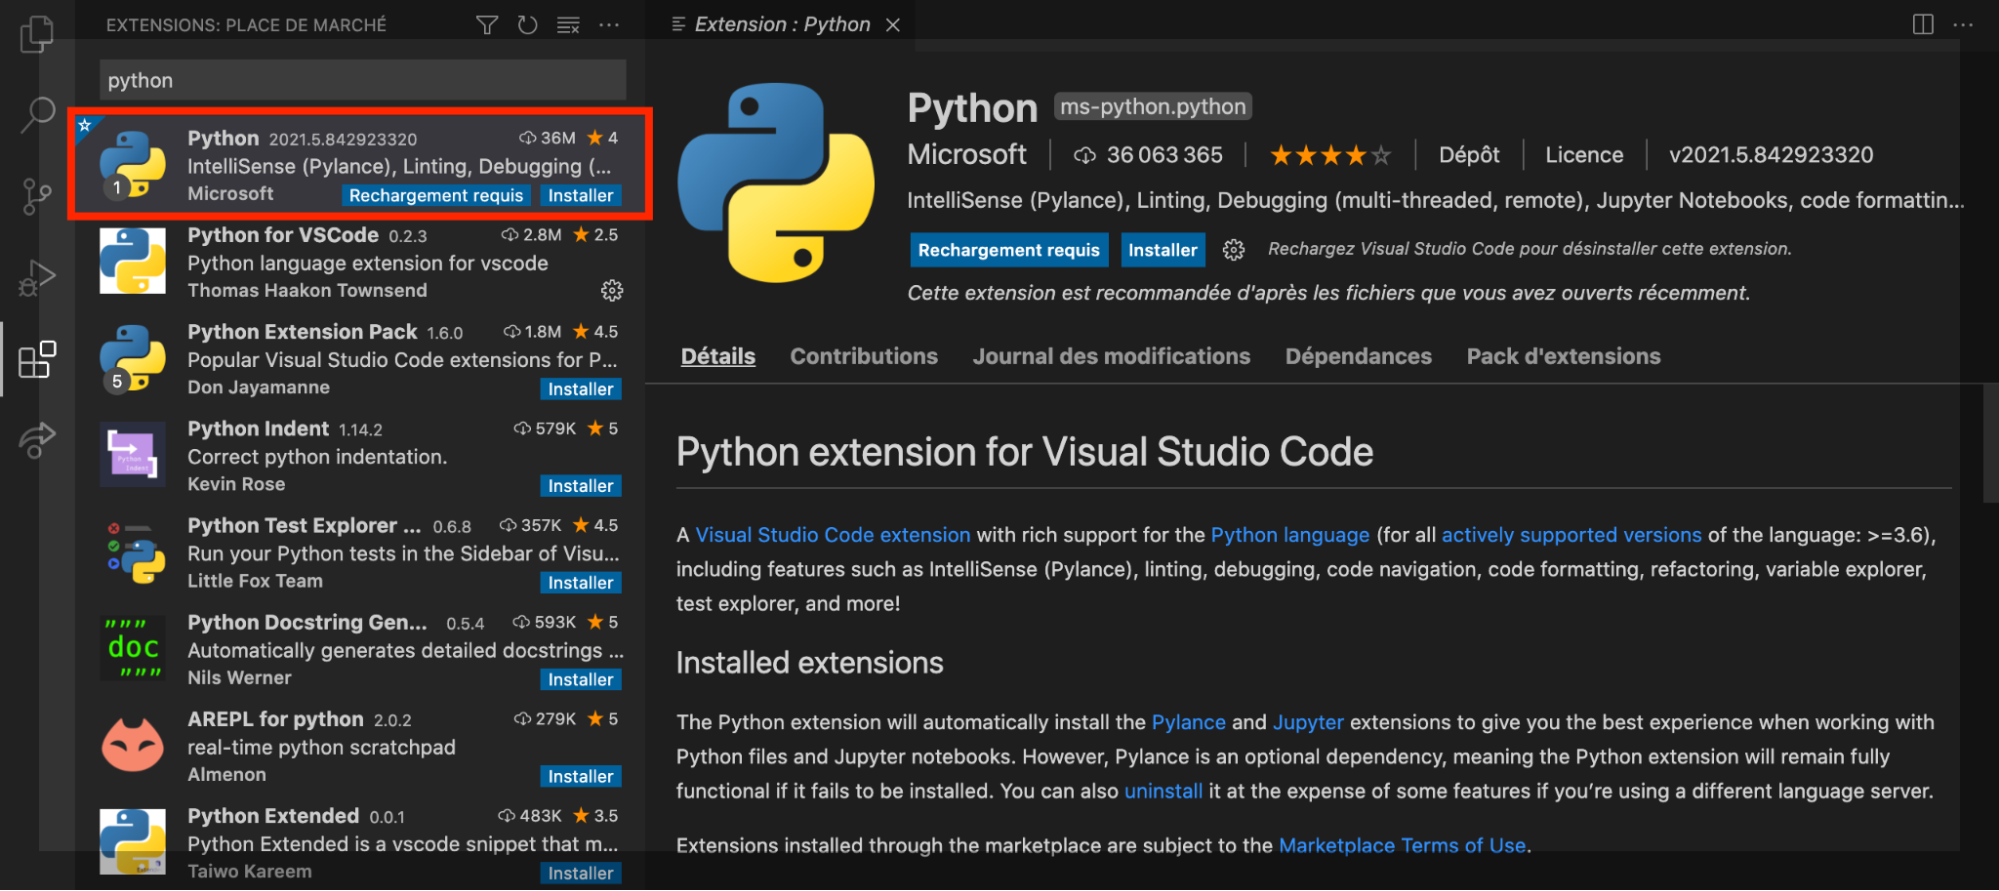 The Python extension